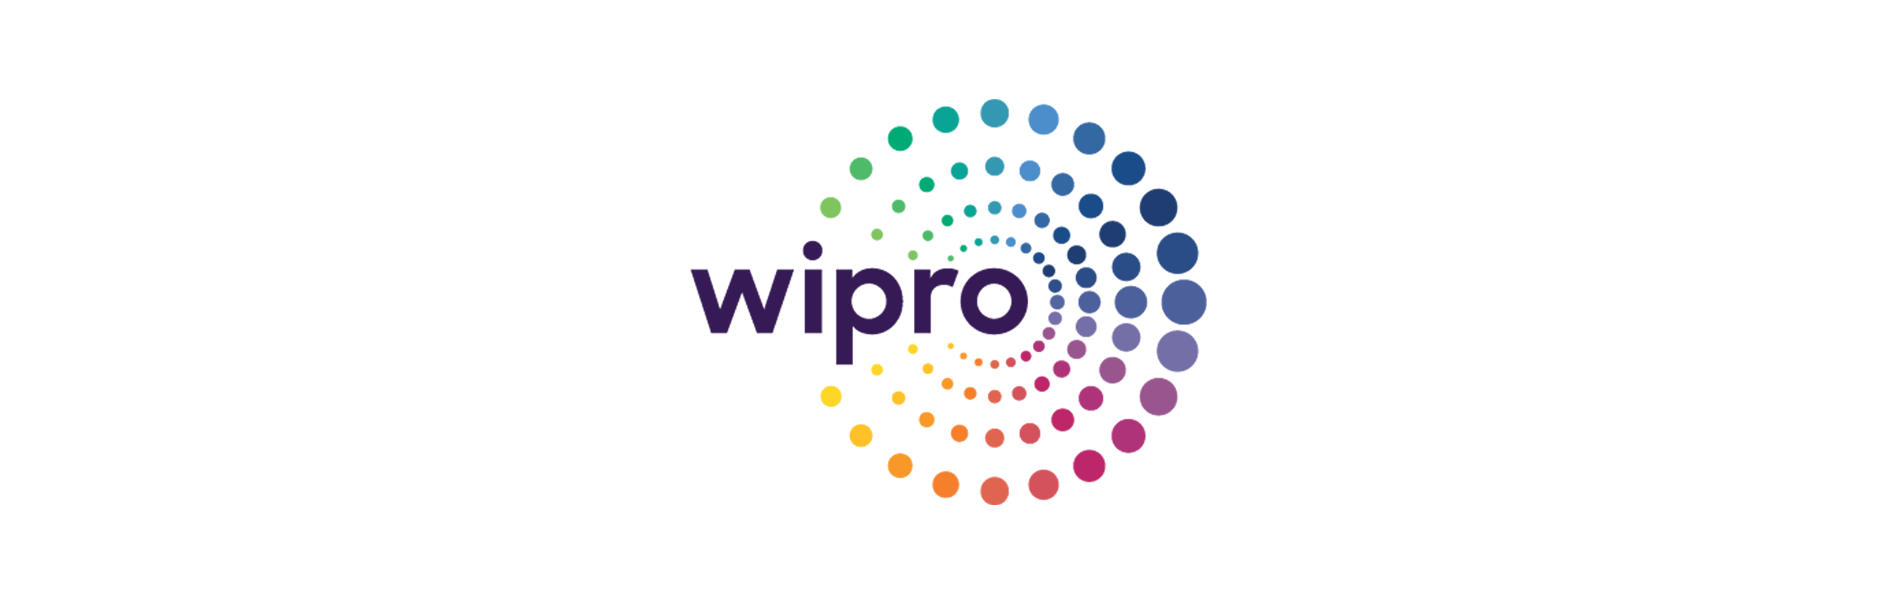 Wipro Recognized in System Integrator Capabilities